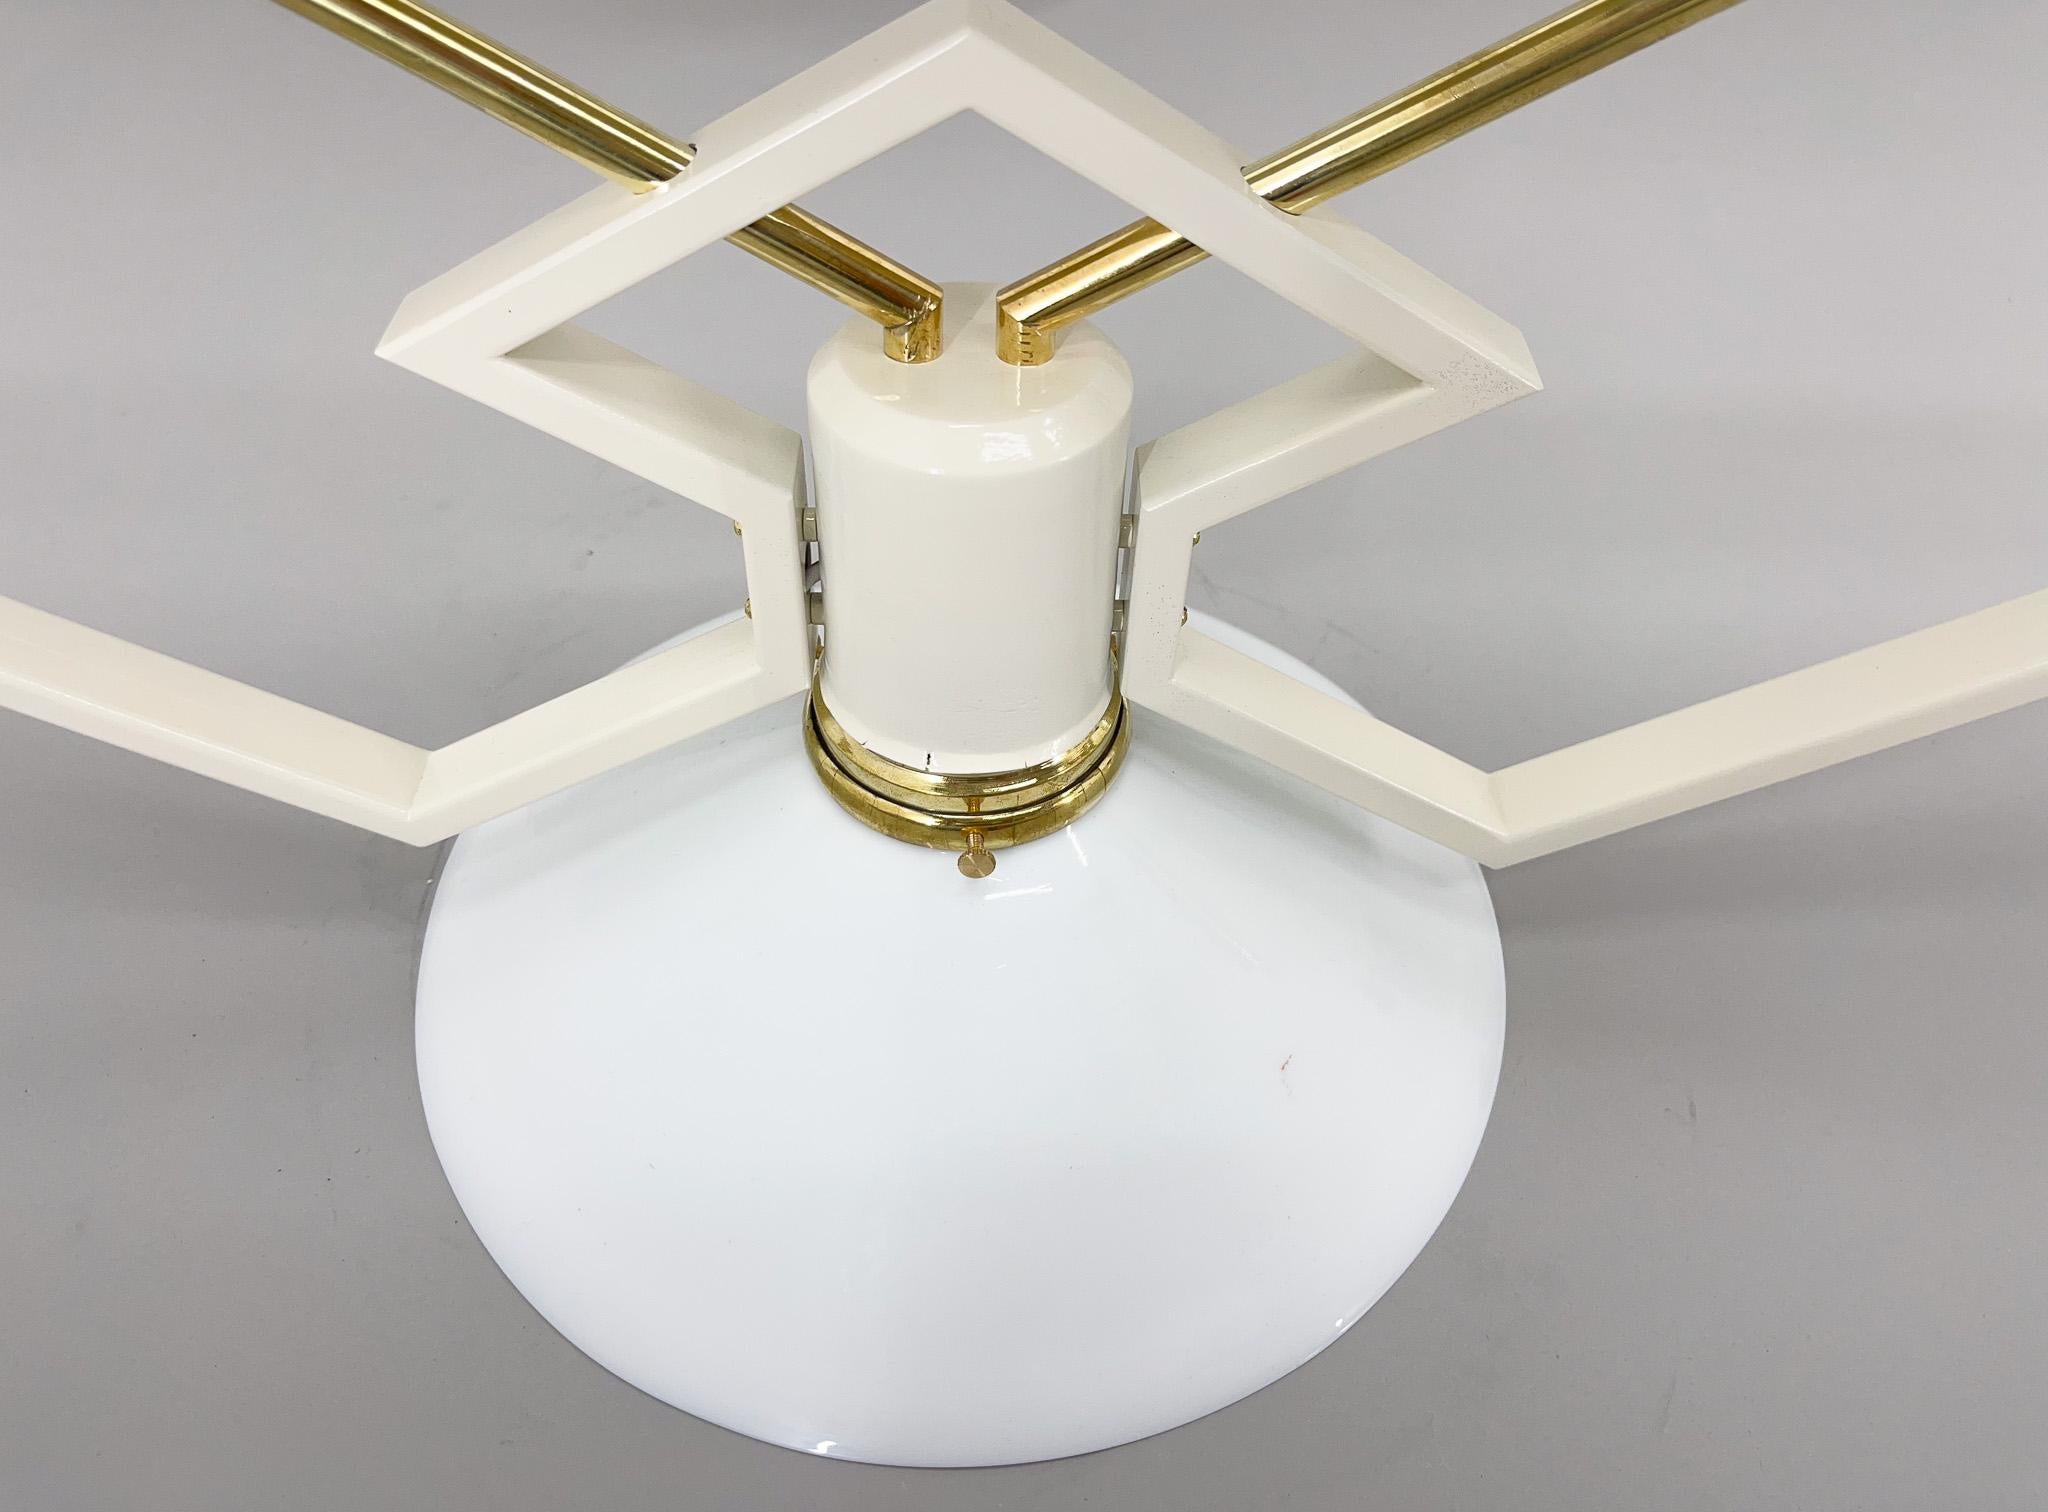 1950s Unique Ceiling Lights with Brass Details, Restored, 4 pieces available For Sale 1